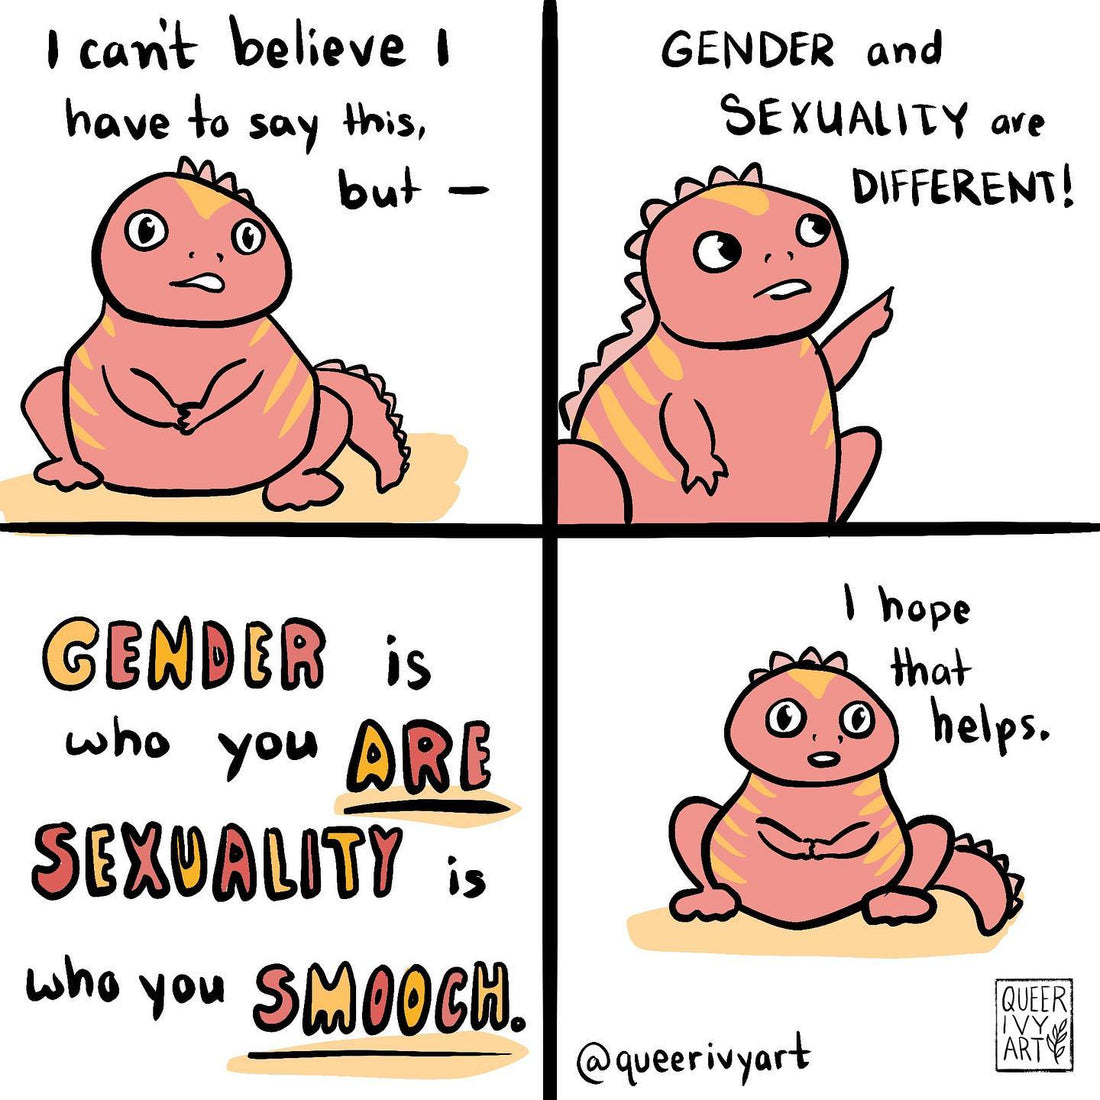 Gender and sexuality are different